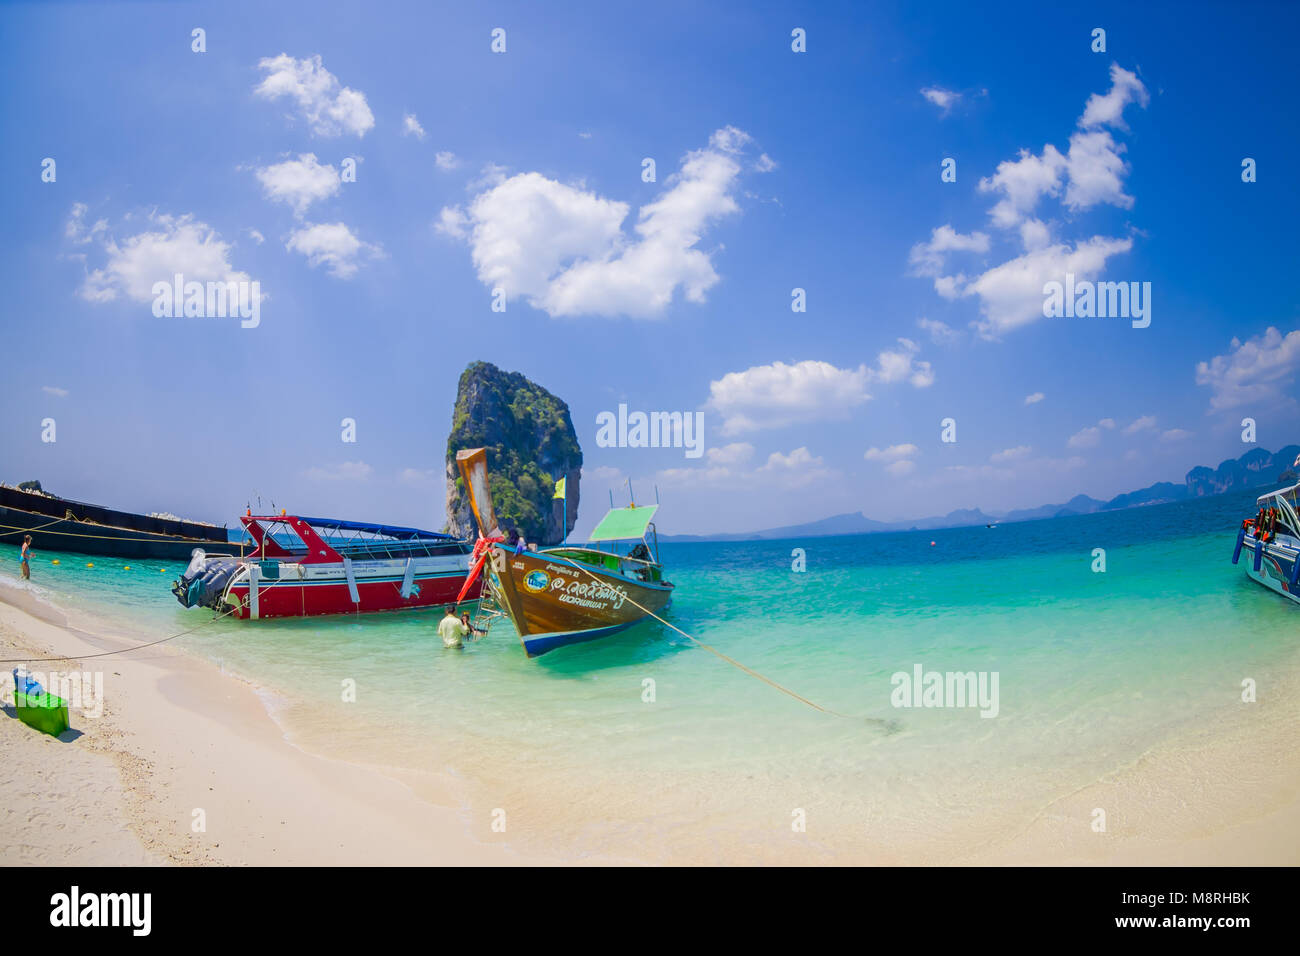 PODA, THAILAND - FEBRUARY 09, 2018: Beautiful outdoor view of unidentified people in a white sand close to long tail boat on Phra nang island in a gorgeous sunny day and turquoise water Stock Photo